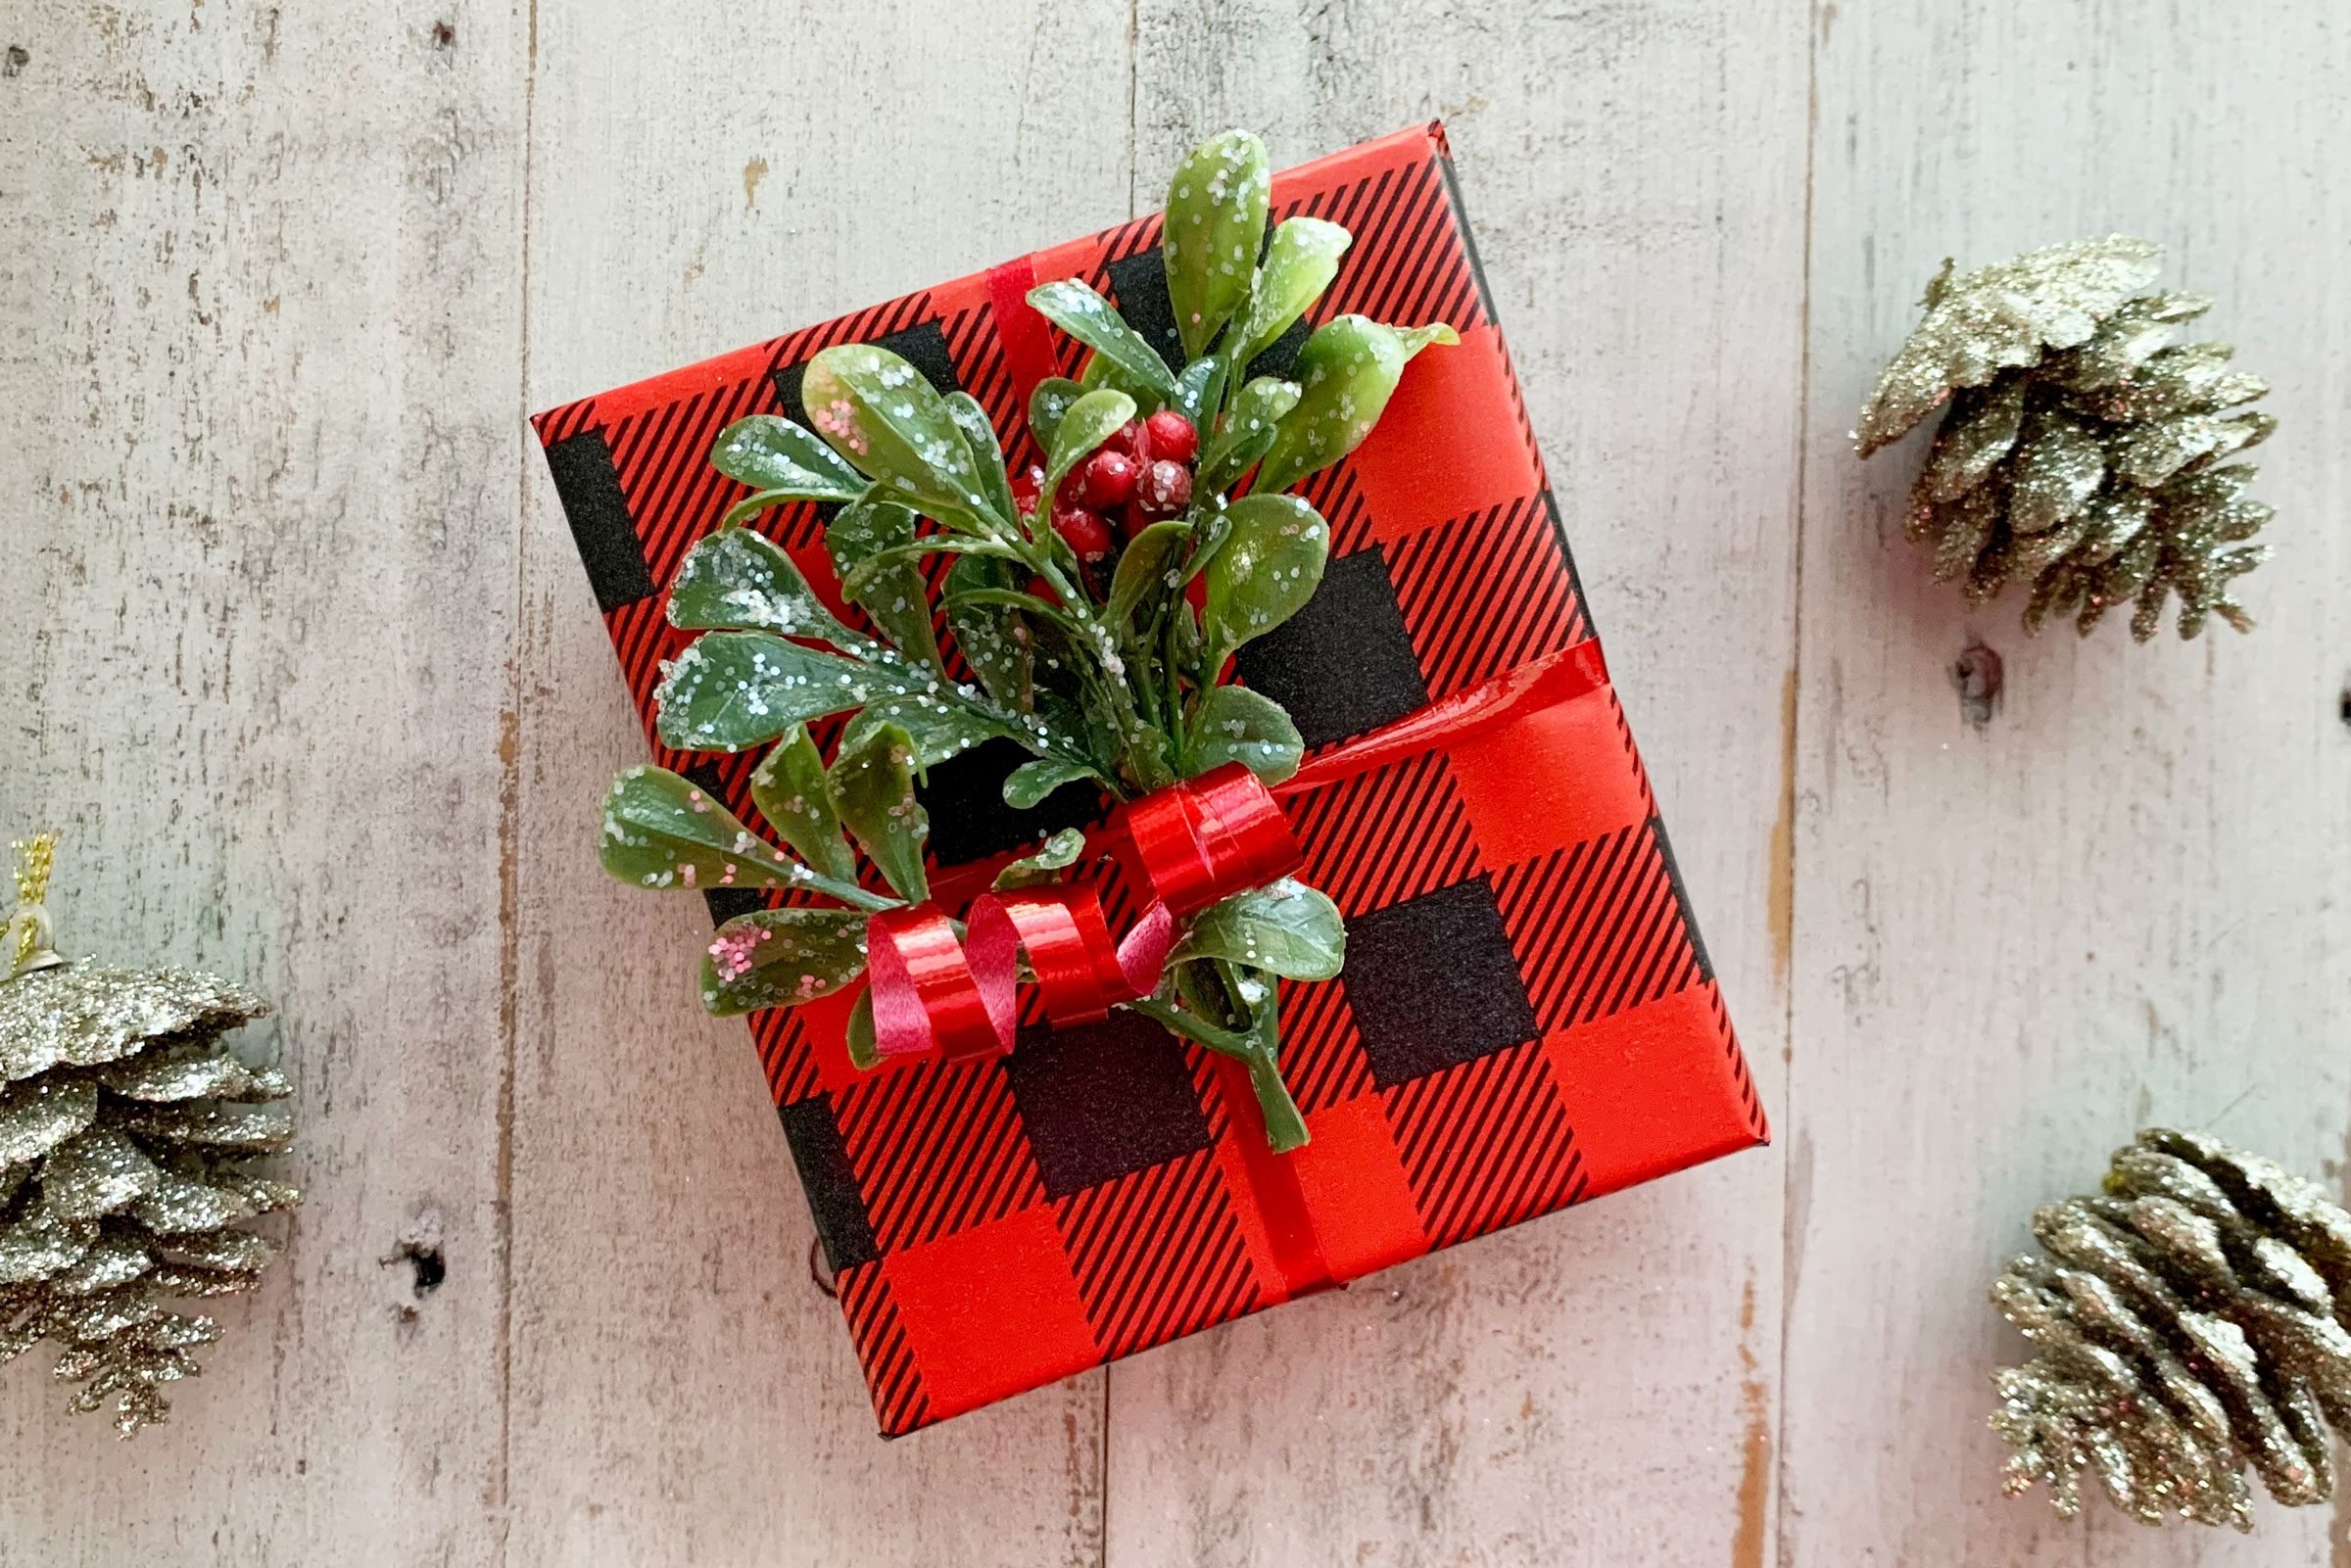 6 Creative Gift Wrapping Ideas to Make Gifts More Beautiful